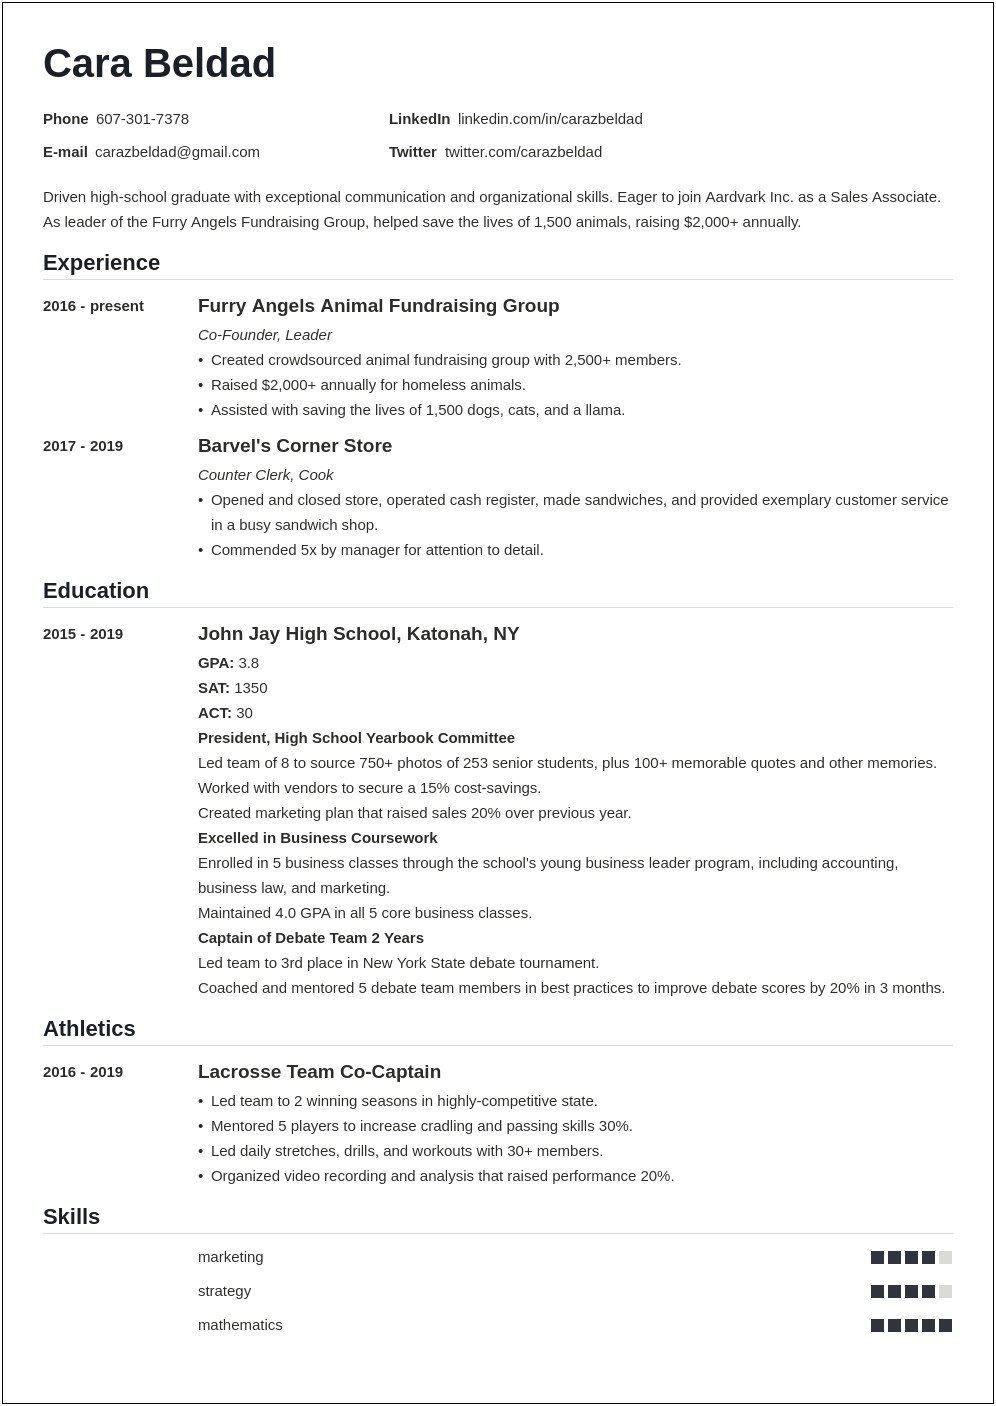 Resume Styles For High School Students